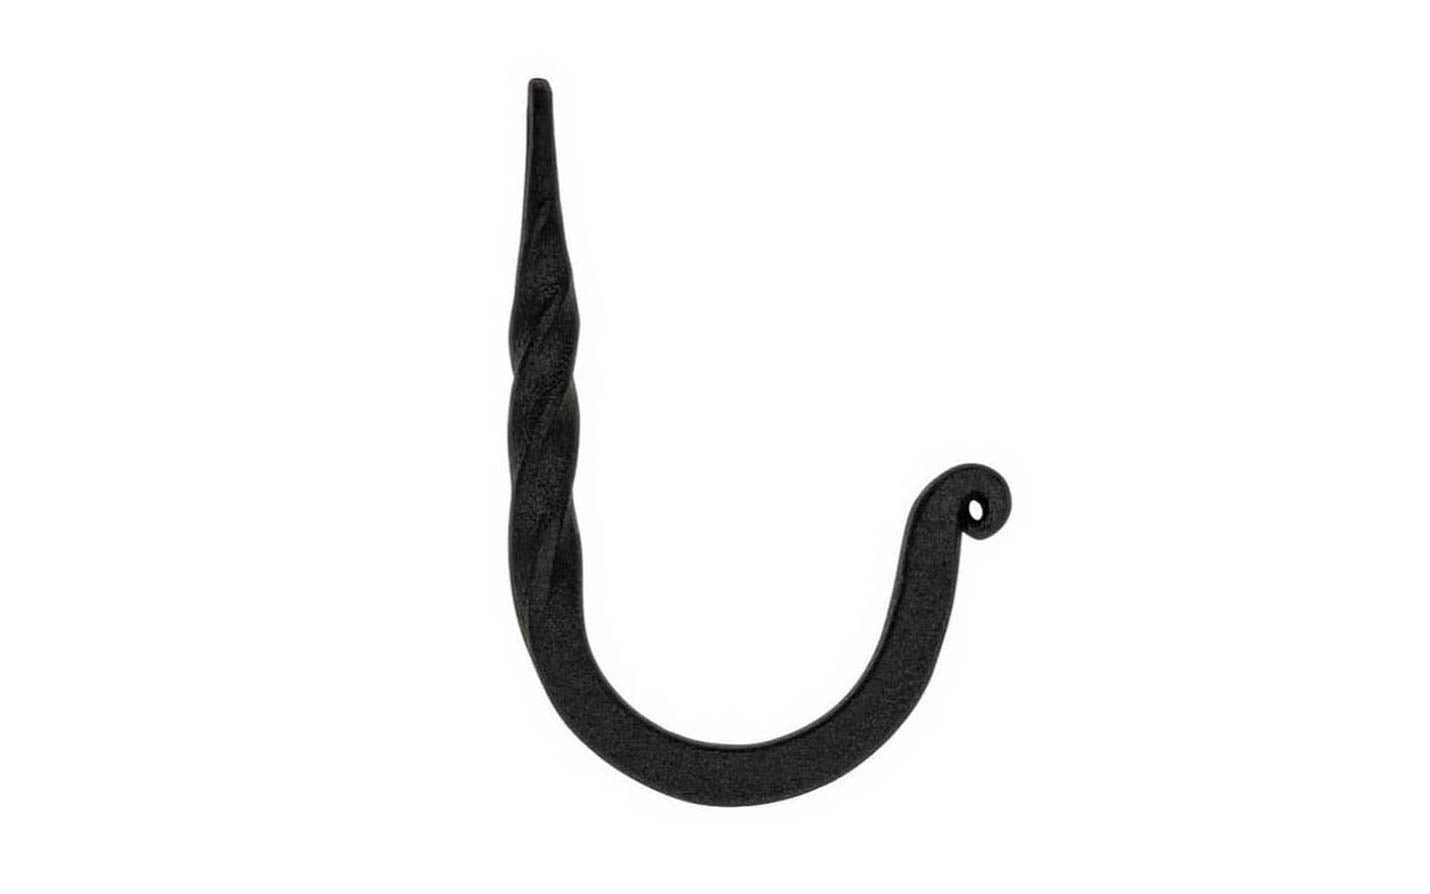 A rustic-looking twisted hook that's made of hand forged steel. It has a black powder coated finish that resists corrosion. This rustic hook is great for many versatile uses both indoors & outdoors. 2-1/2" overall length & 1-5/8" projection. Great for bathrooms, kitchens, hallways, bedroom, entryways - Old Twisted Hook